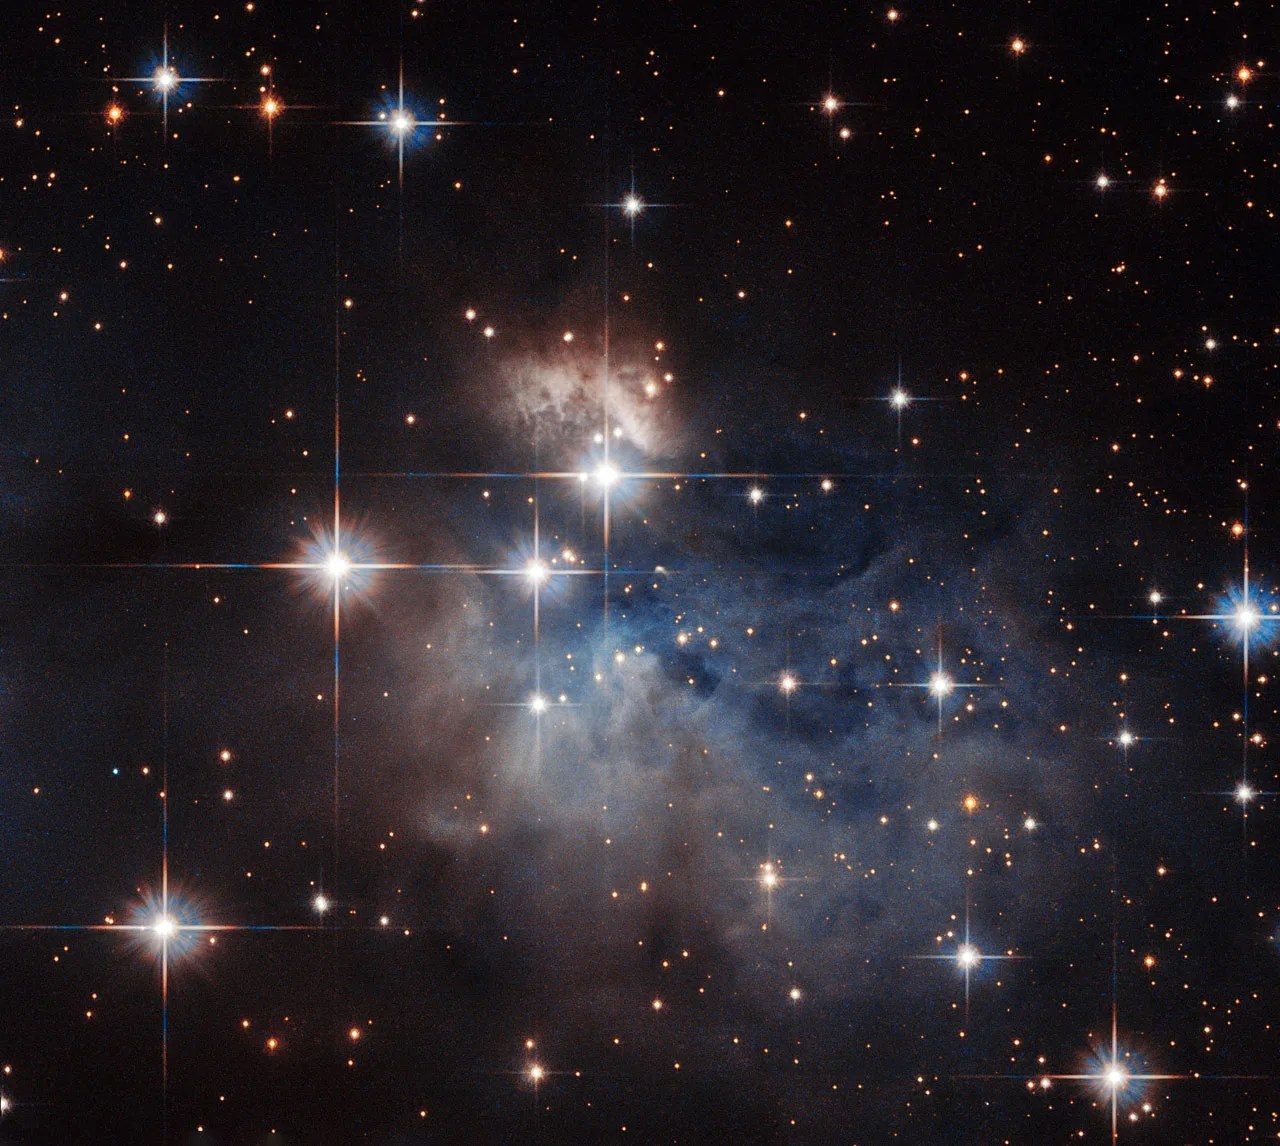 An emission-line star known as iras 12196-6300.